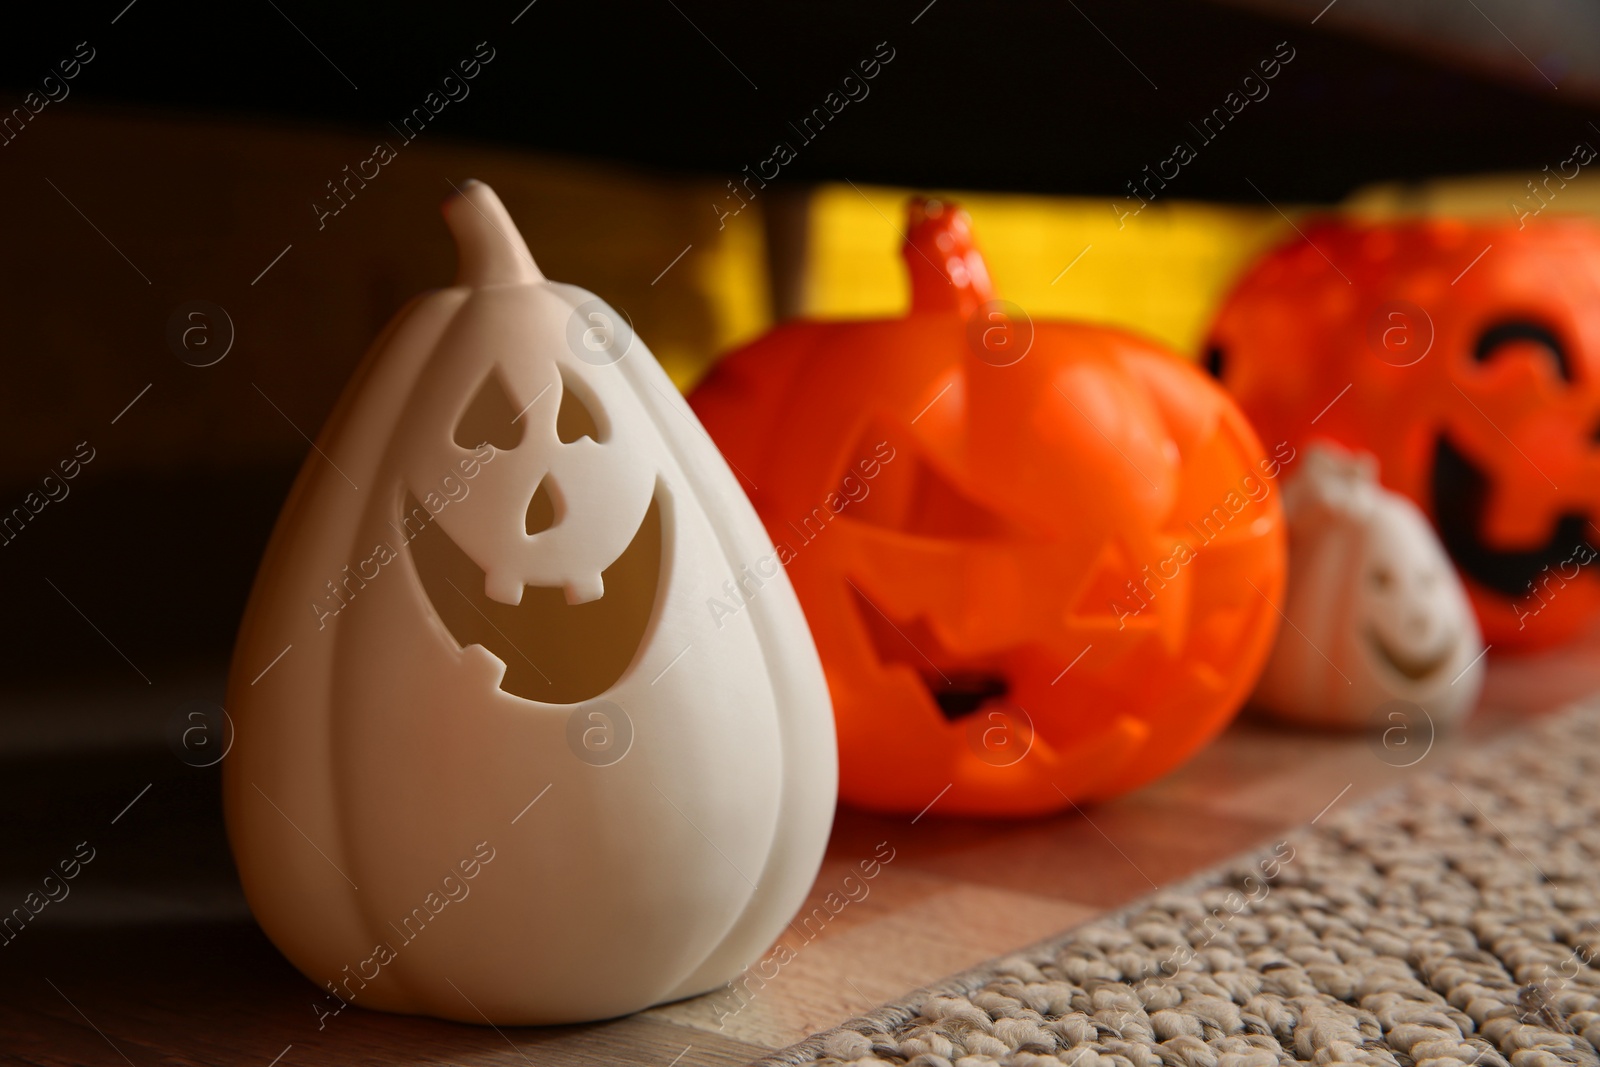 Photo of Different pumpkin shaped candle holders on floor in room